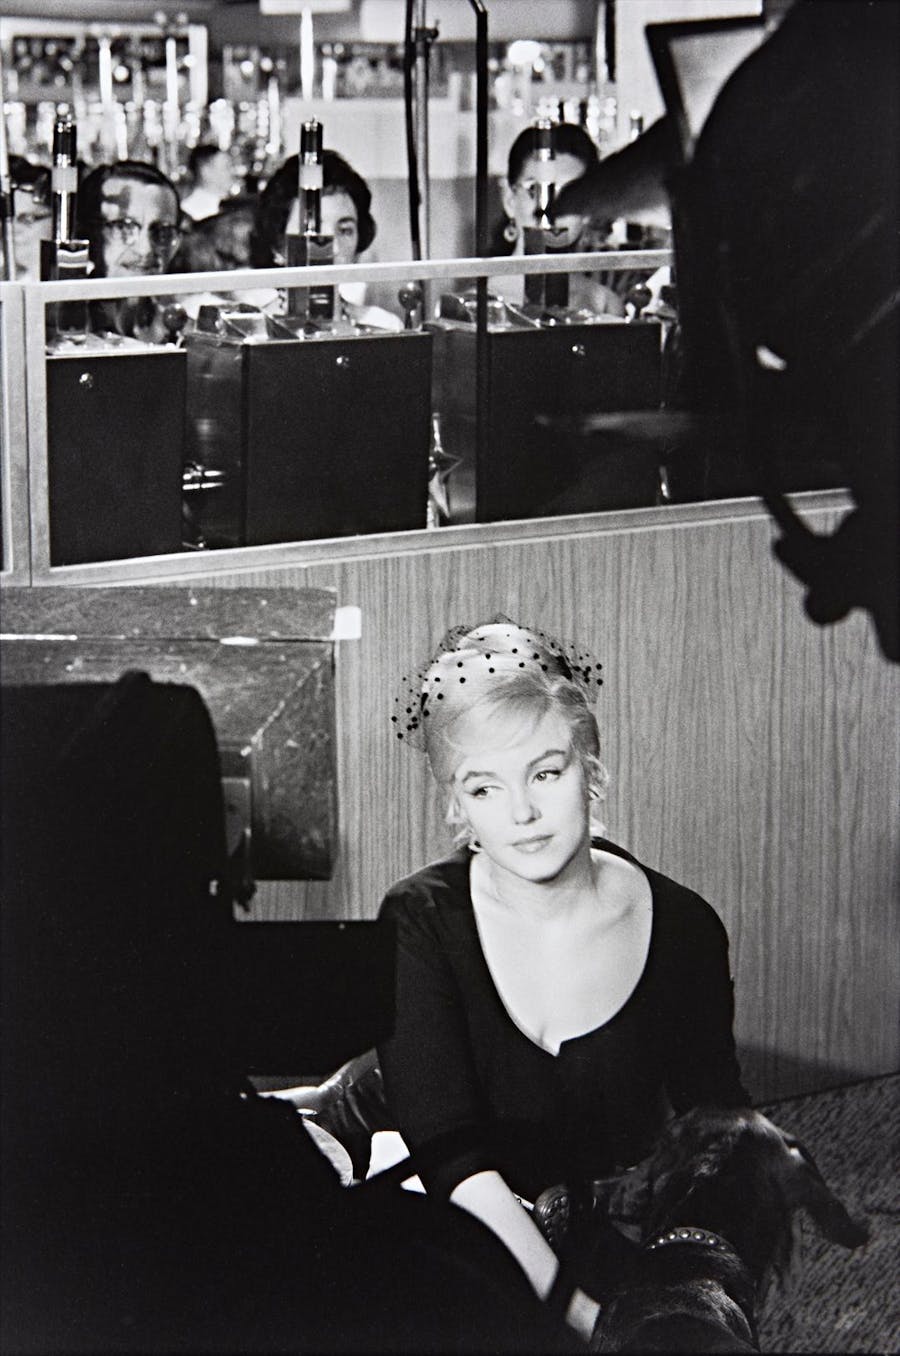 Henri Cartier-Bresson, ‘Marilyn Monroe in Reno’, 1961. As a photographer at Magnum Photos, Cartier-Bresson accompanied the filming of Monroe’s last completed film ‘The Misfits’ (1961). Photo © Phillips